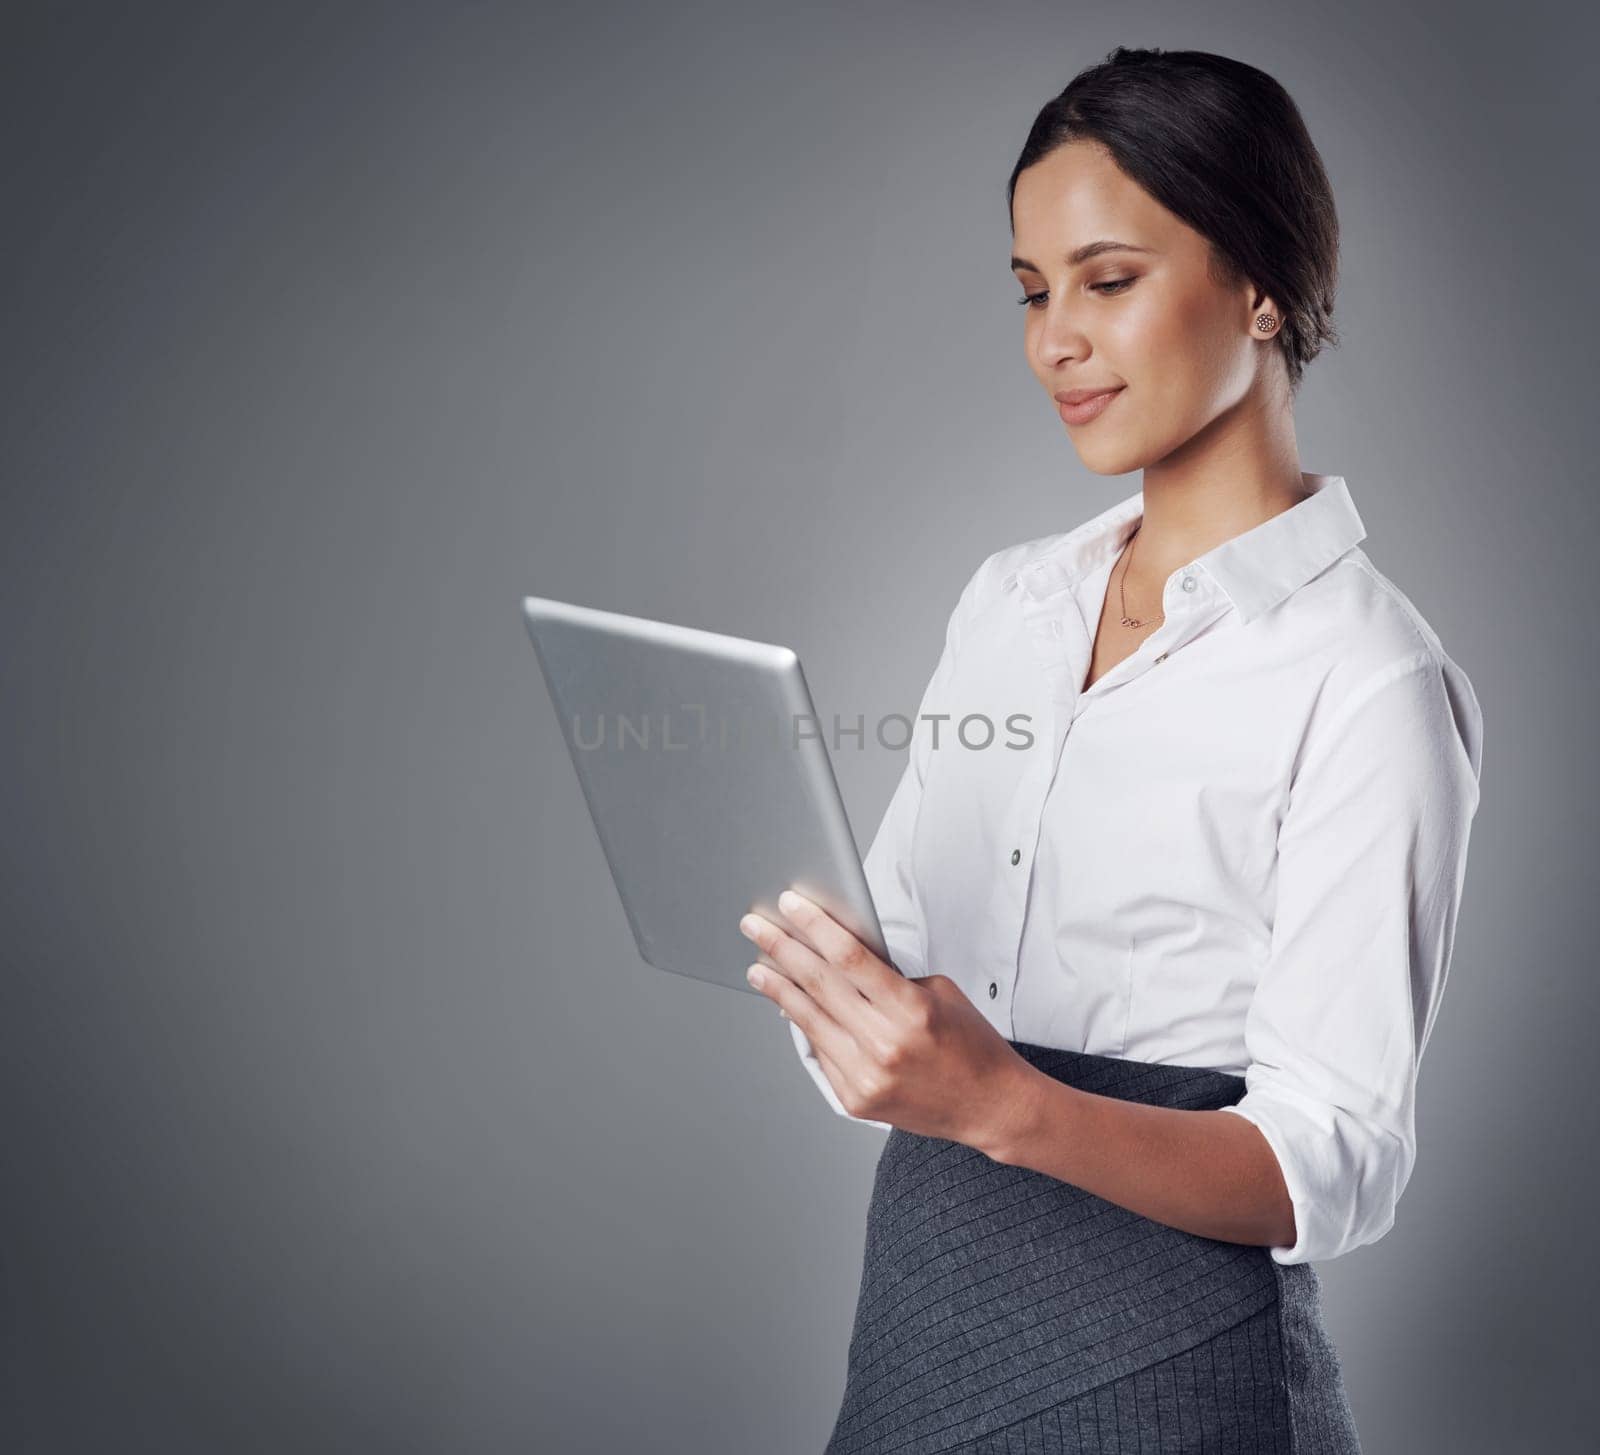 Keeping up with competitive business using cutting edge technology. Studio shot of a young businesswoman using a digital tablet against a gray background. by YuriArcurs